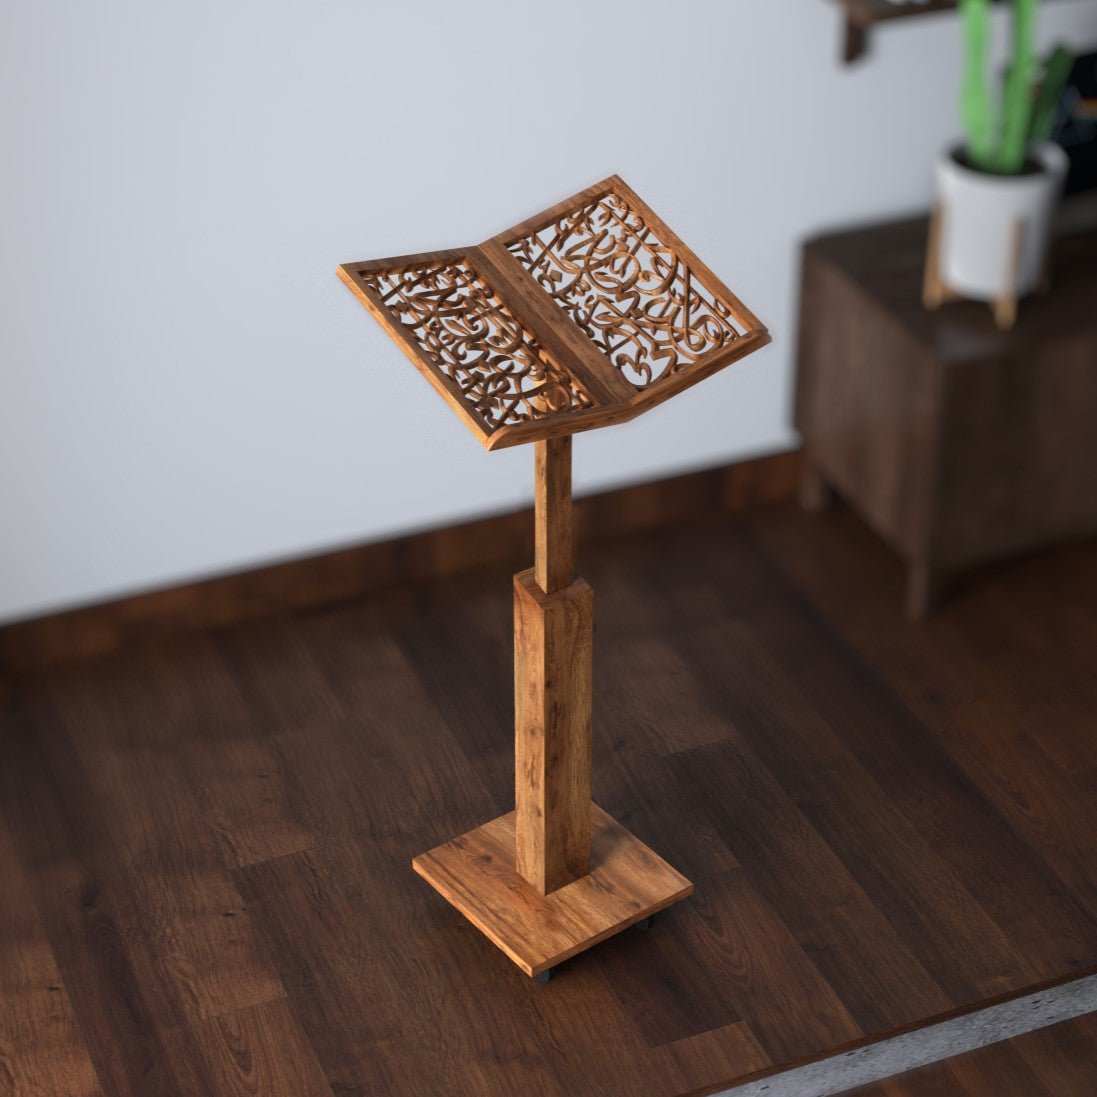 Adjustable Wooden Arabic Caligraphy Quran Stand